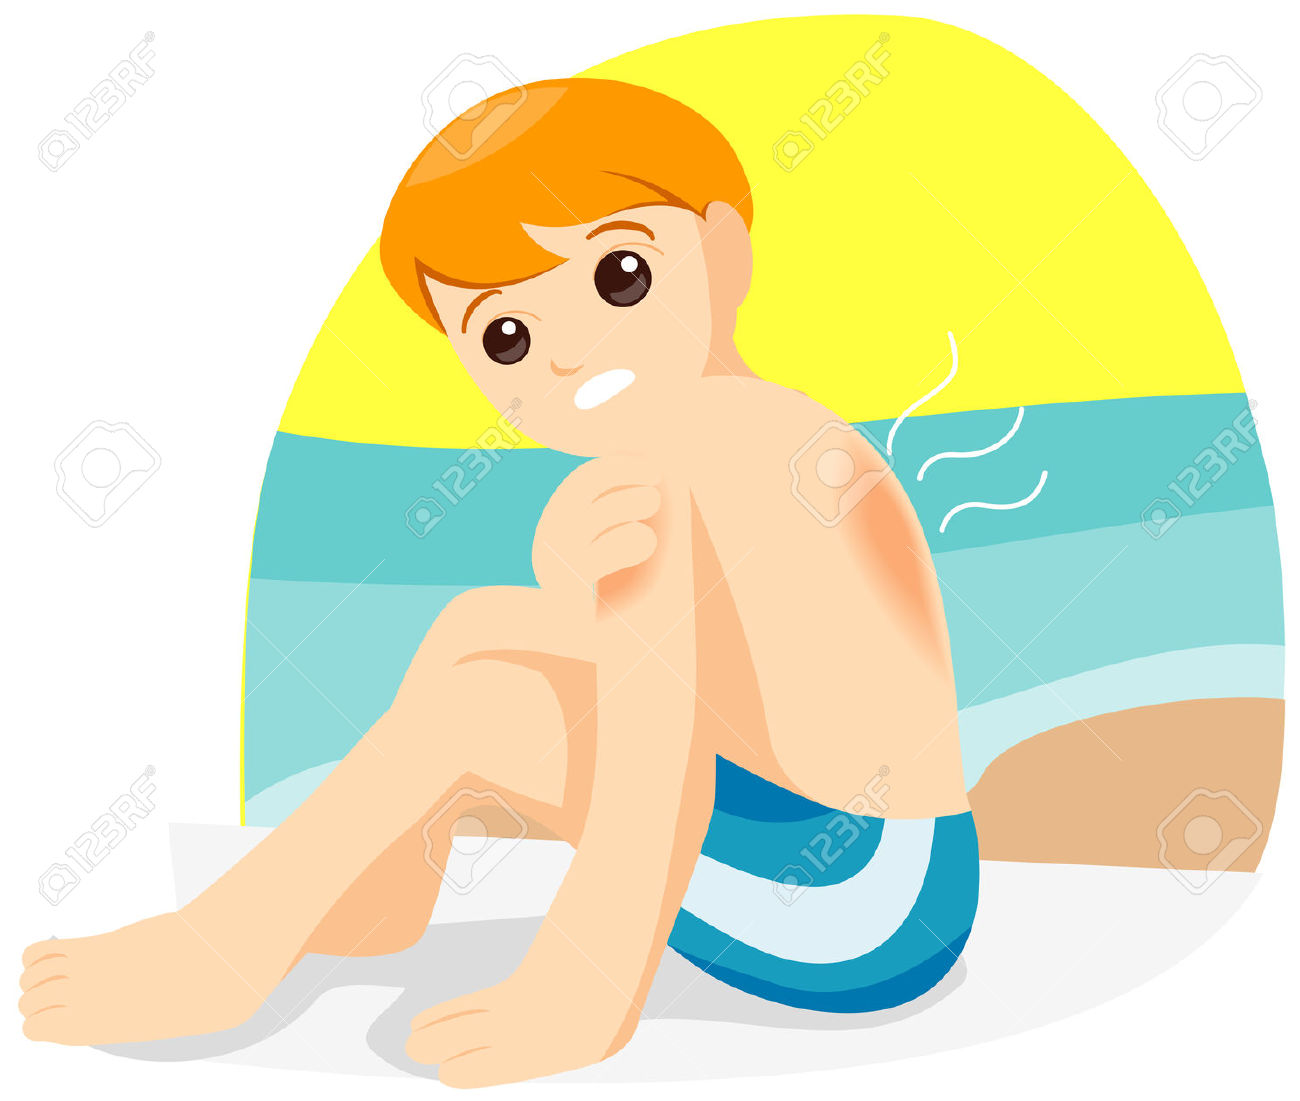 Child with Sunburn with Clipping Path Stock Vector - 3890864